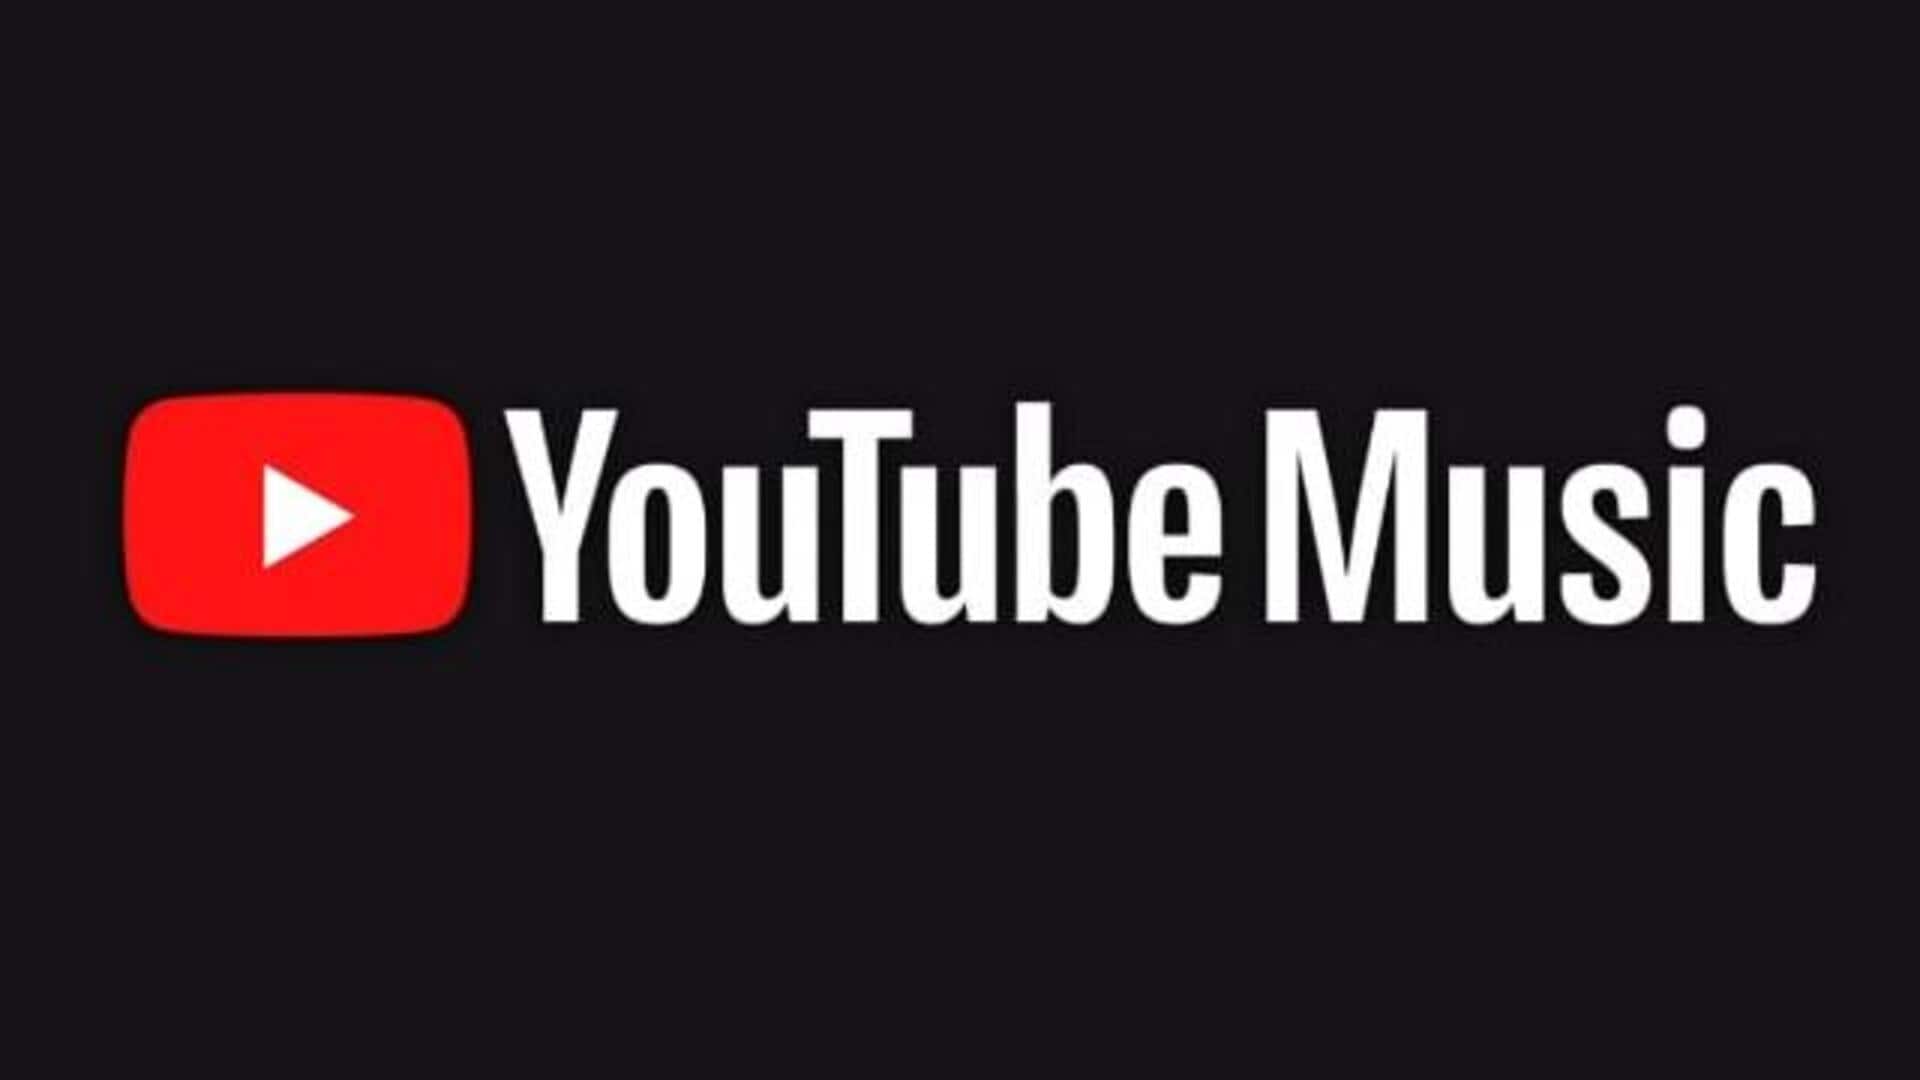 YouTube Music introduces enhanced mini-player with swipe controls for iPhone